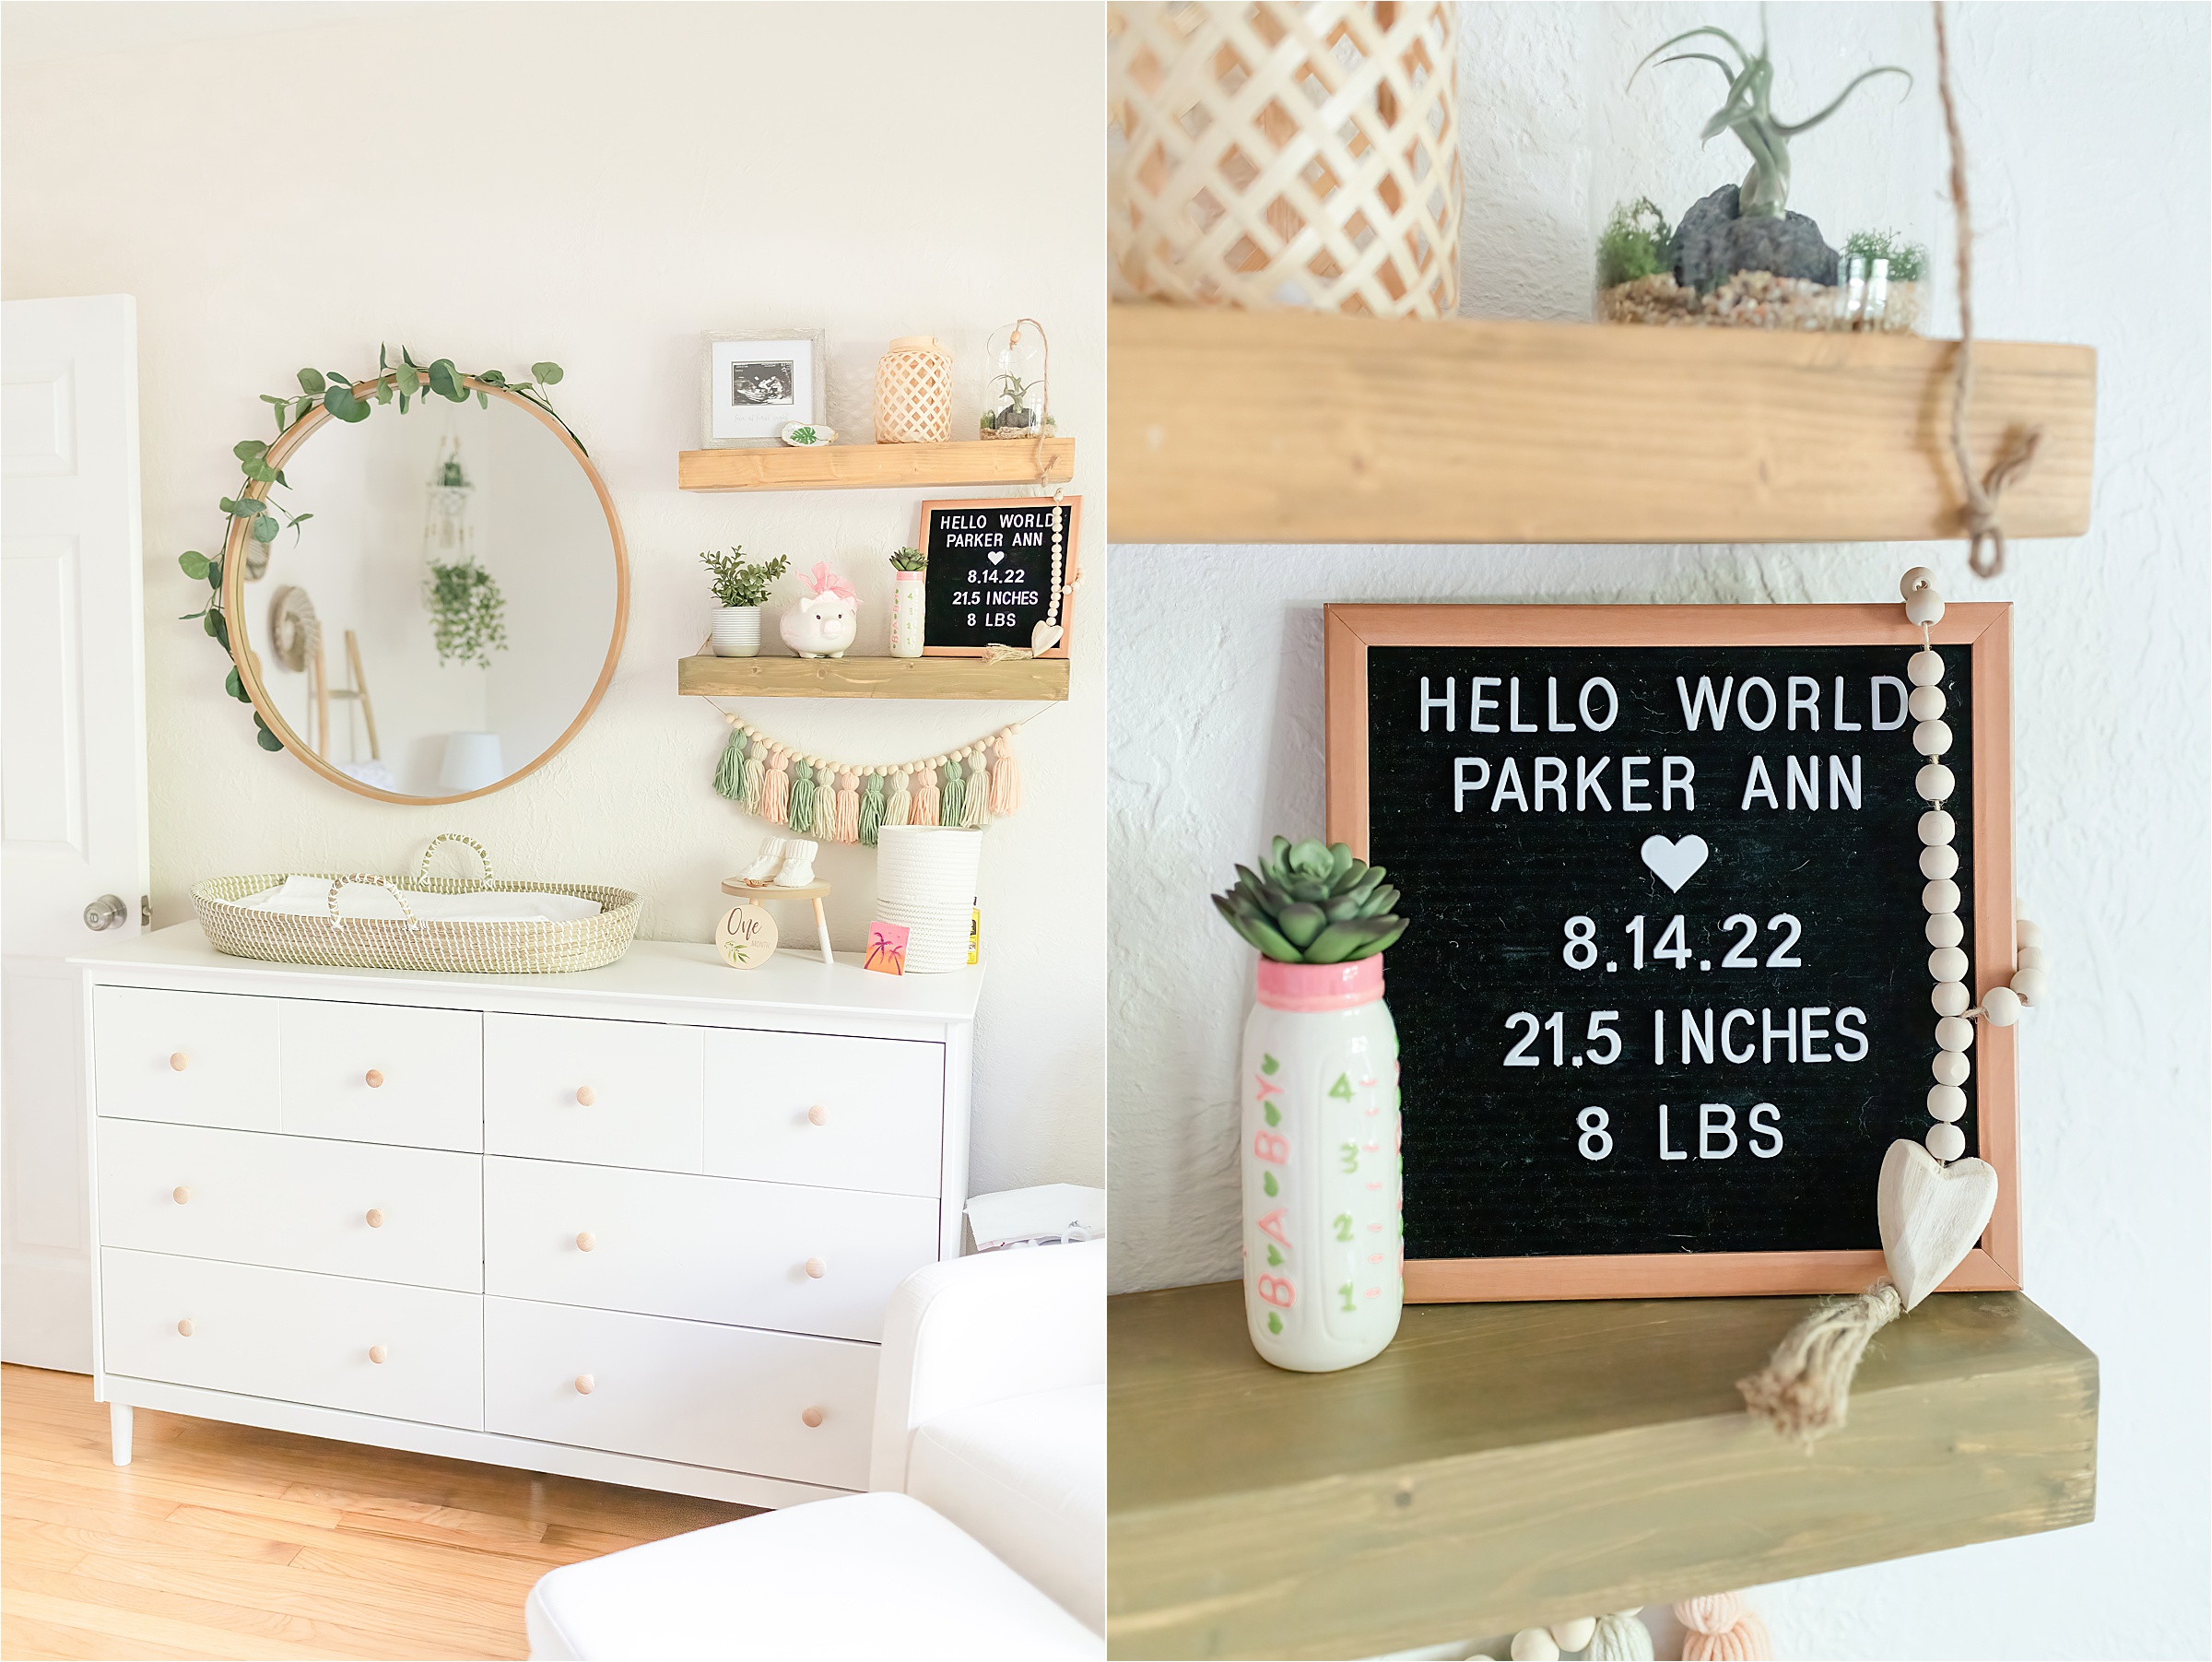 White modern baby nursery with touches of greenery | Lifestyle Newborn Photography